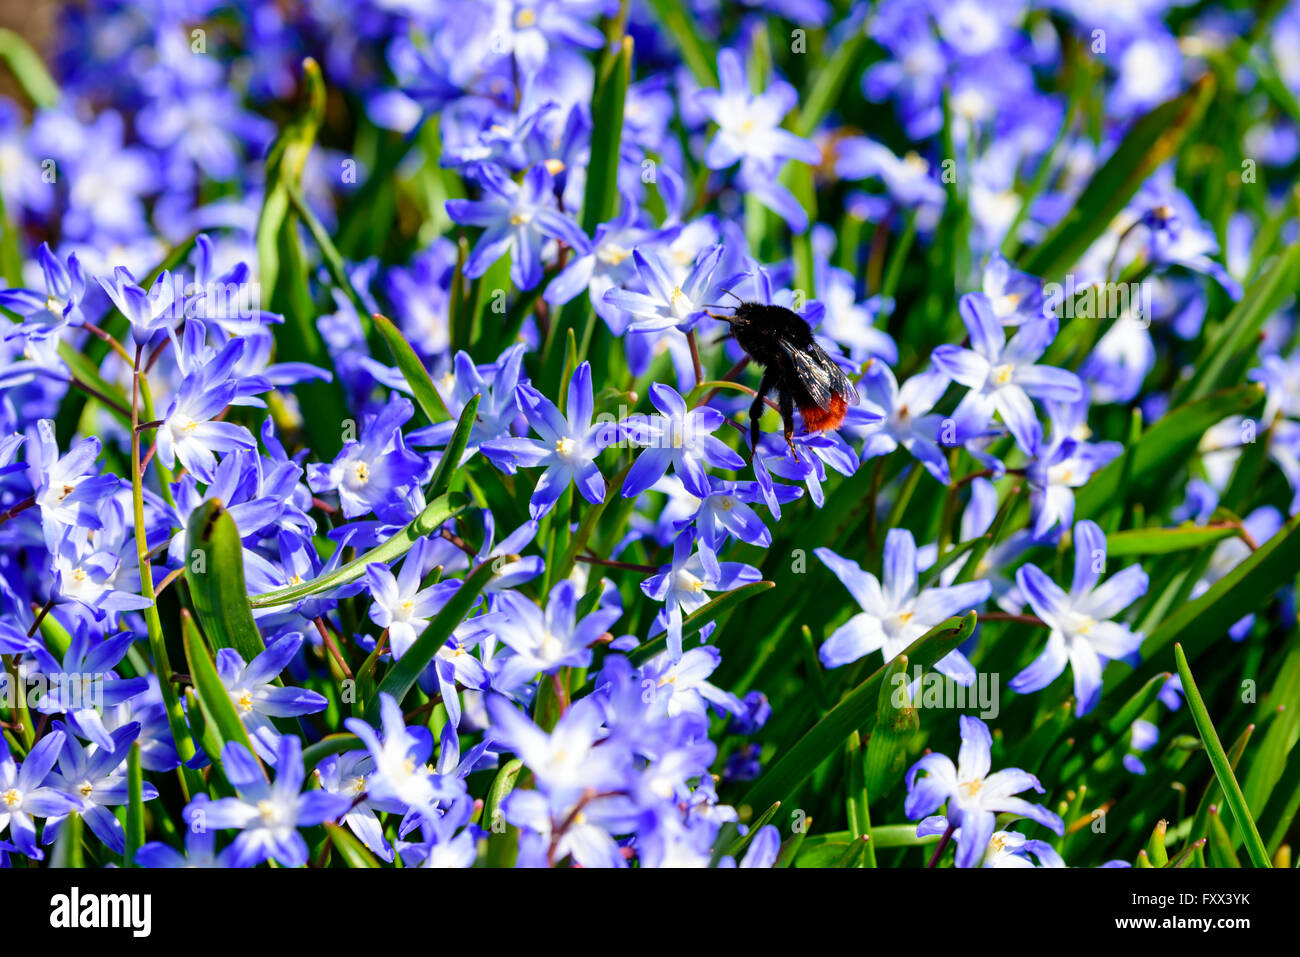 Bombus lapidaries, the red-tailed bumblebee, here seen feeding on some blue scilla in early spring. Stock Photo